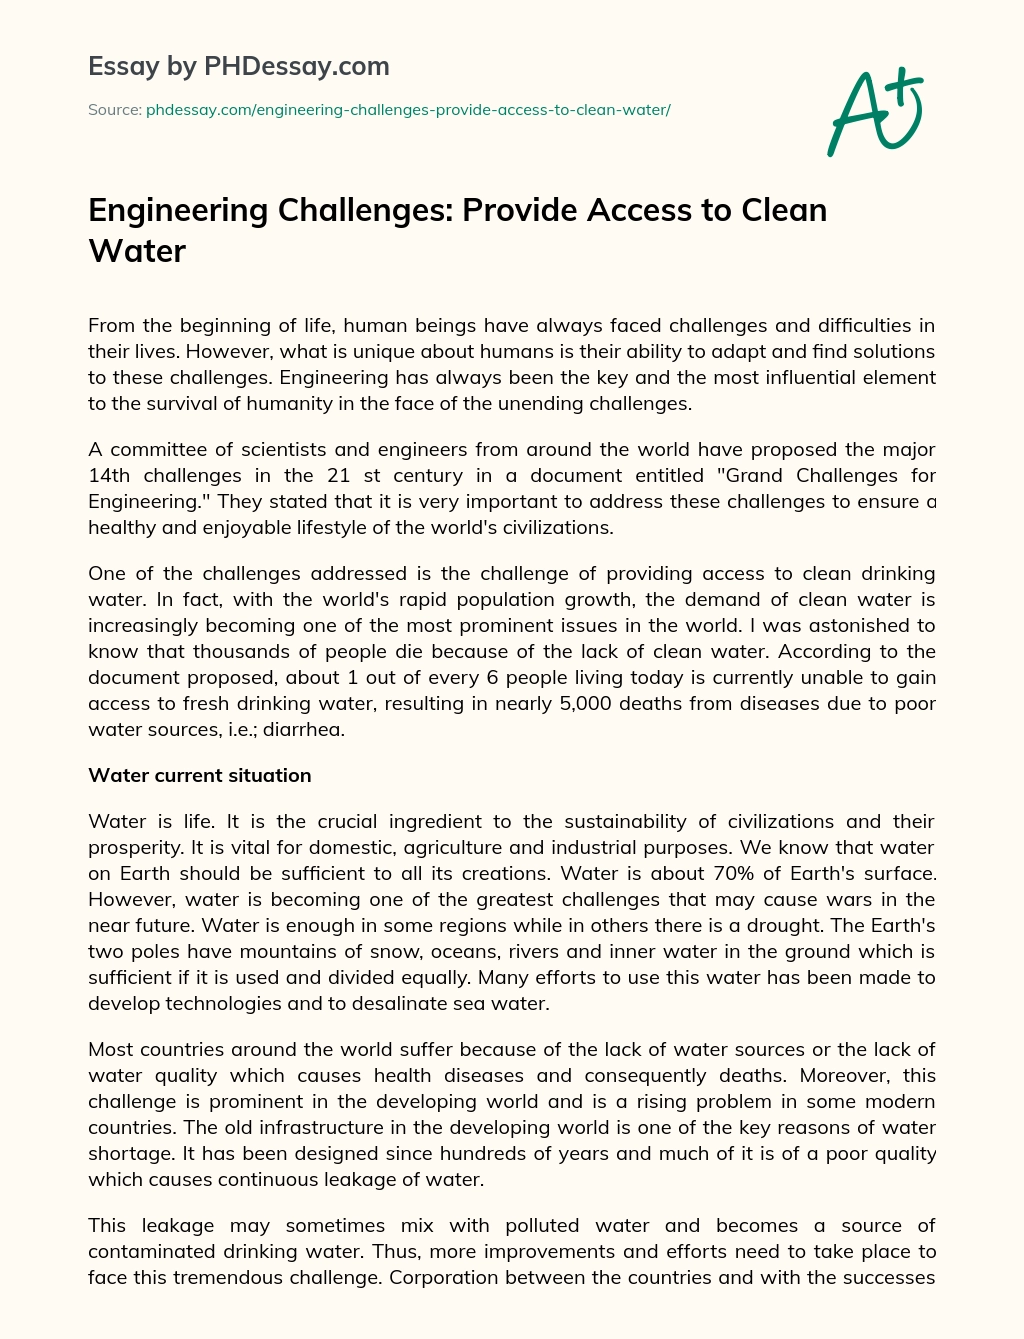 Engineering Challenges: Provide Access to Clean Water essay